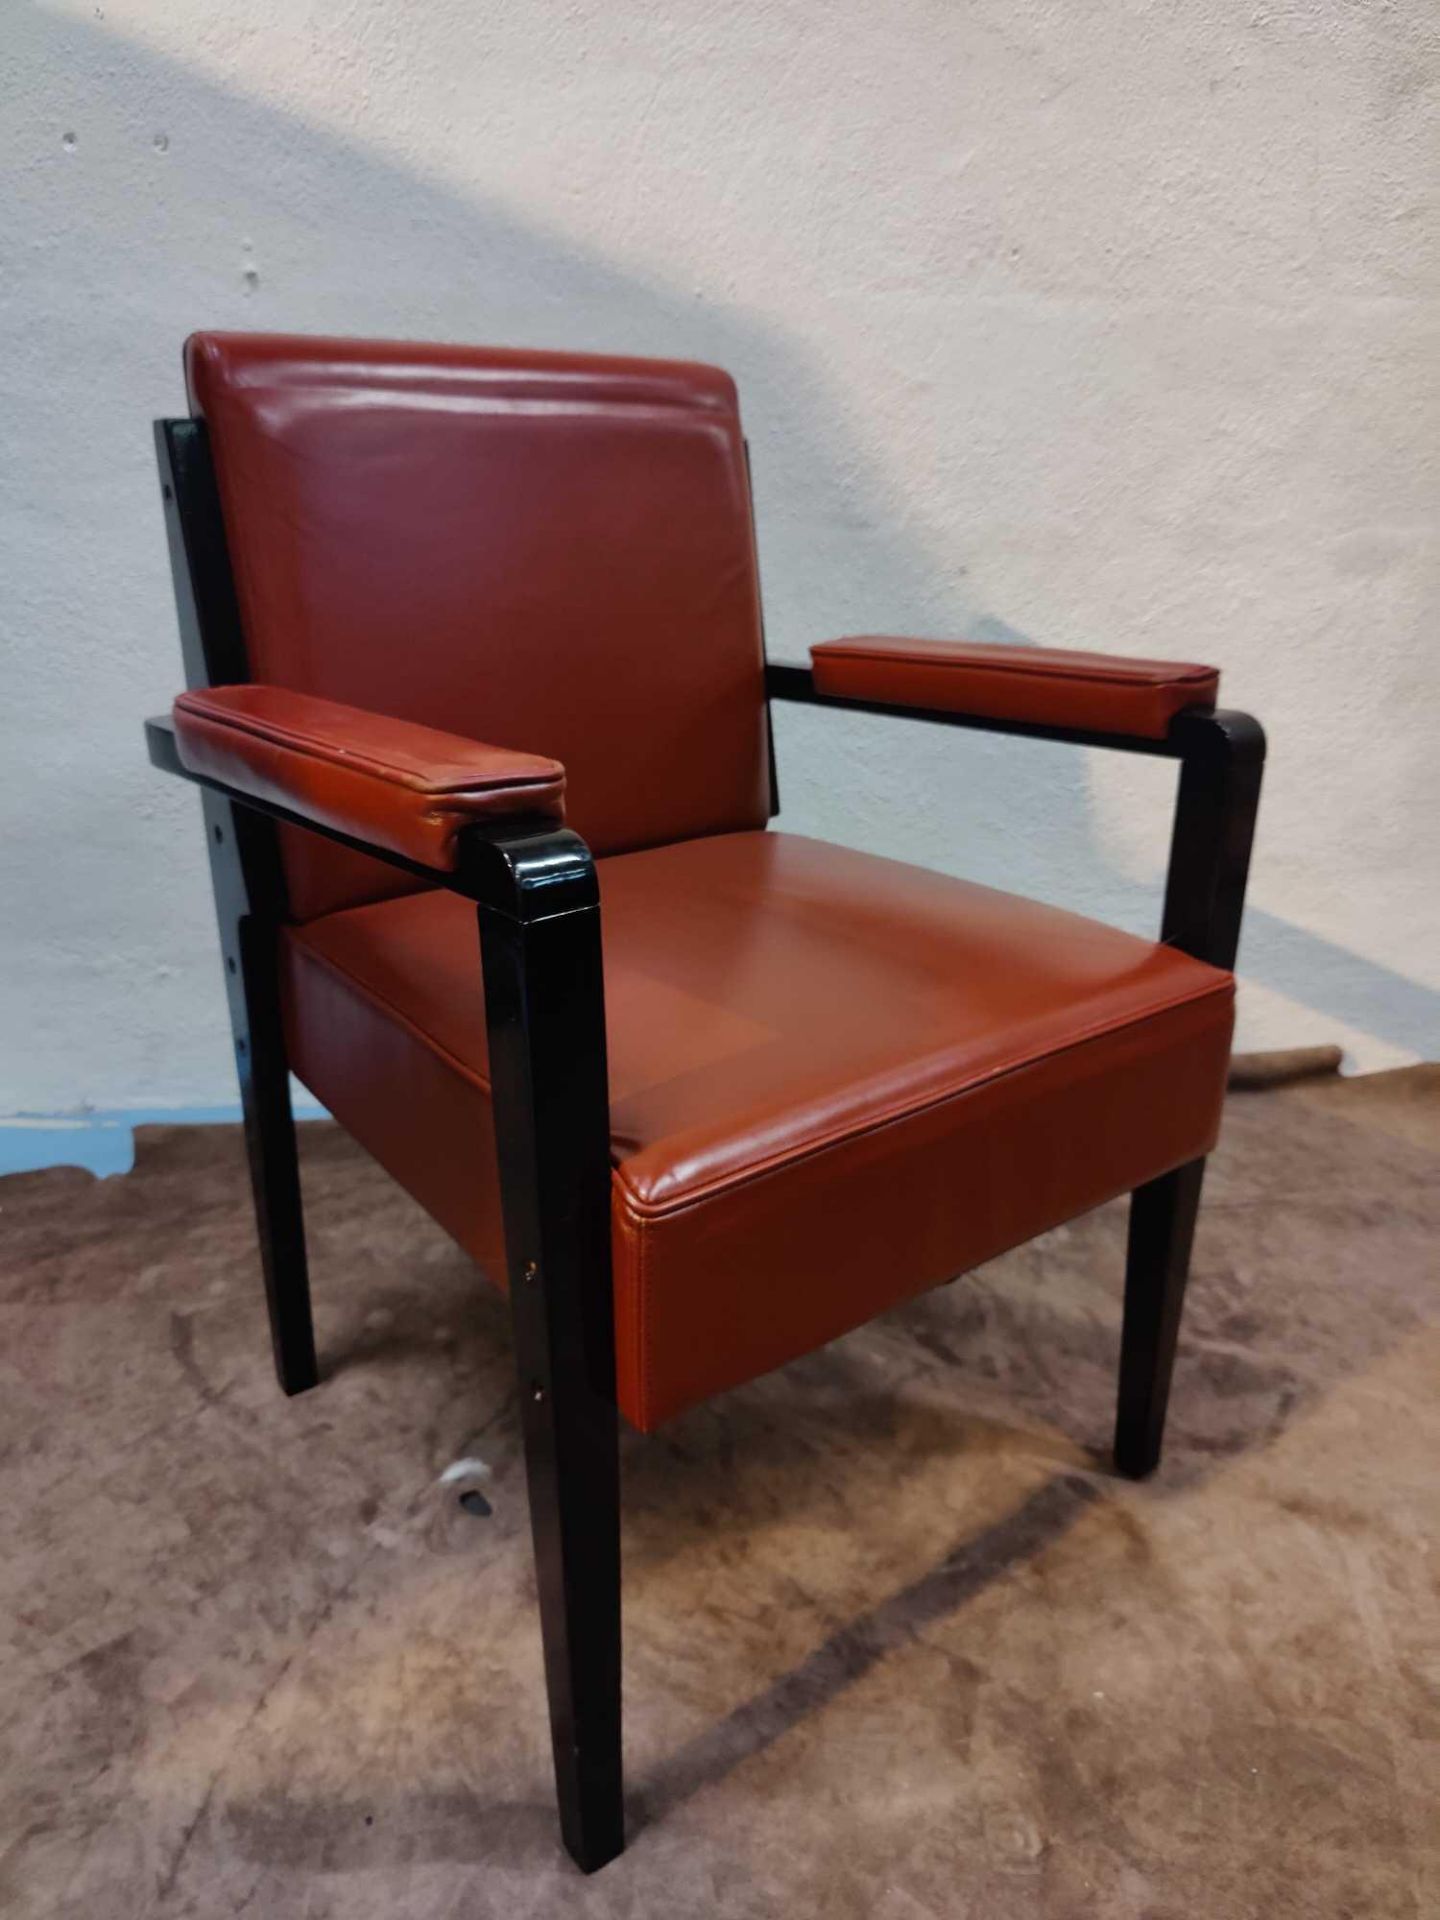 Black Metal Frame Danish Style Red Leather Arm Chair - Image 3 of 3